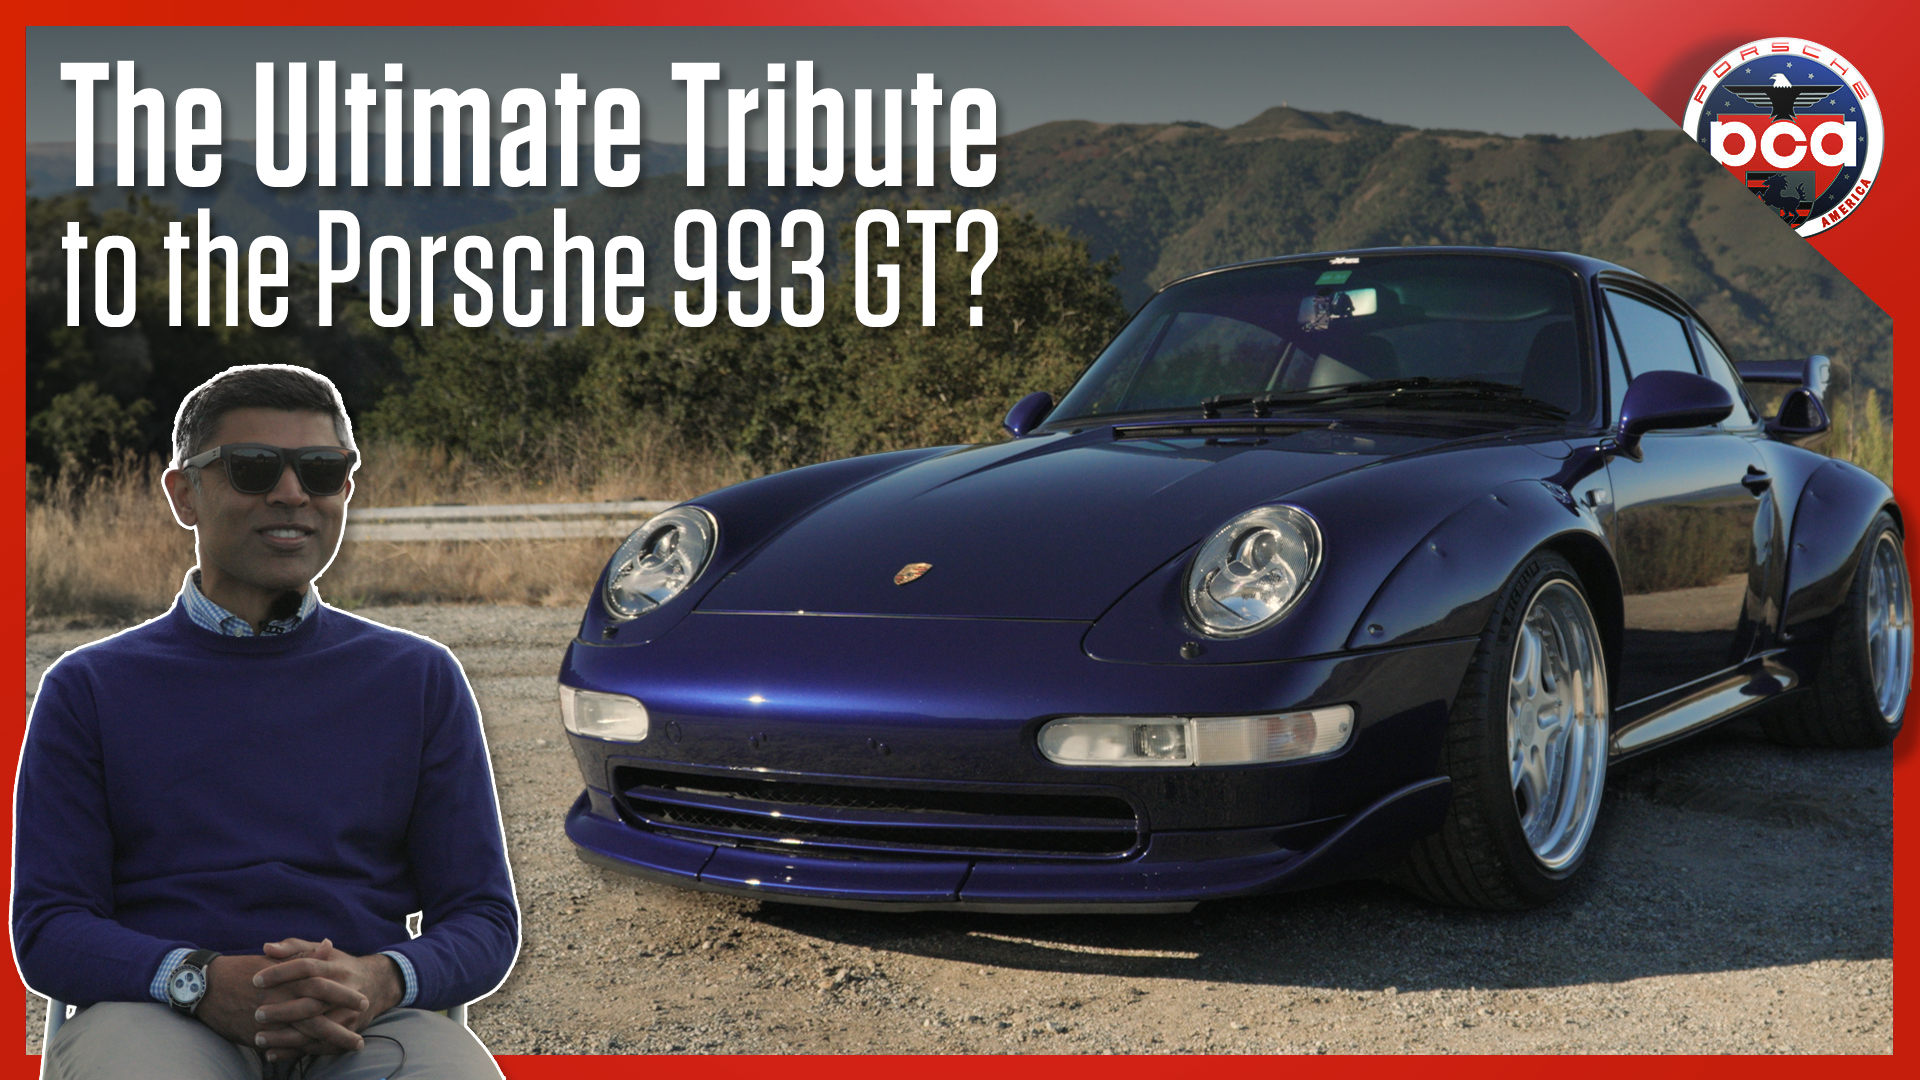 Coming Thursday: 1995 Porsche 911 Turbo to AWD GT — The Ultimate Tribute?